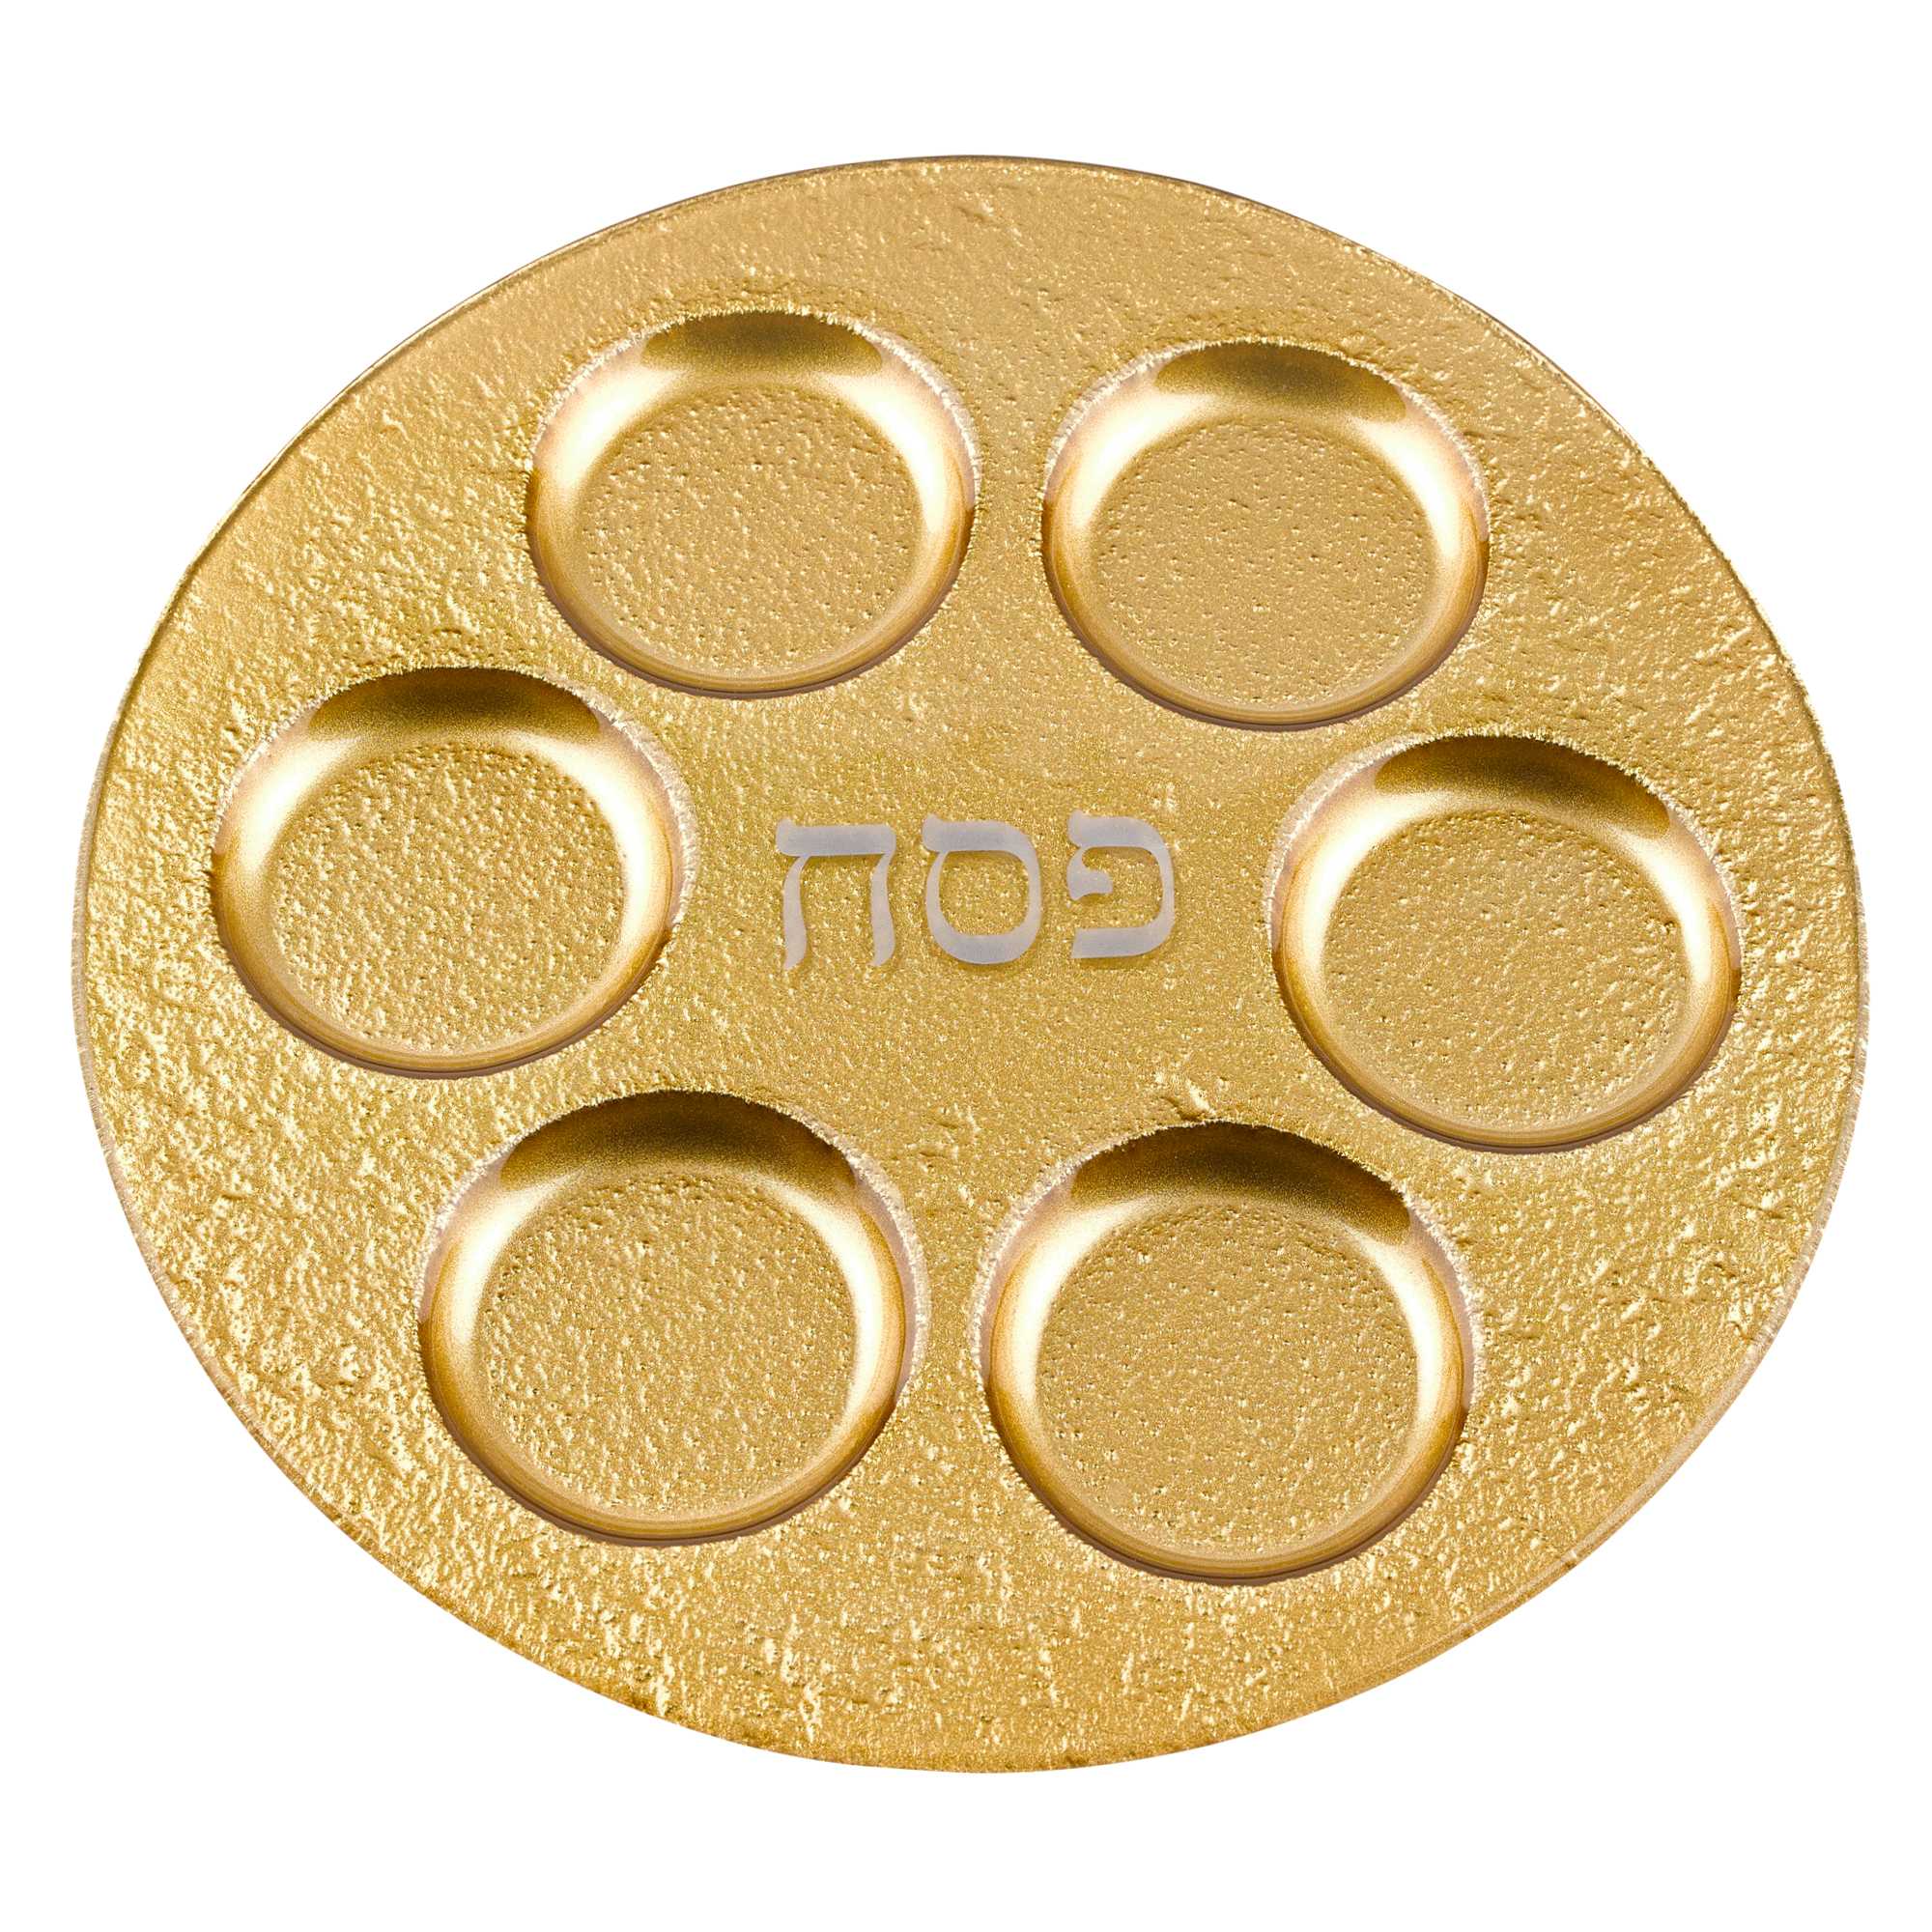 13" Handcrafted Decor Gold Seder Plate